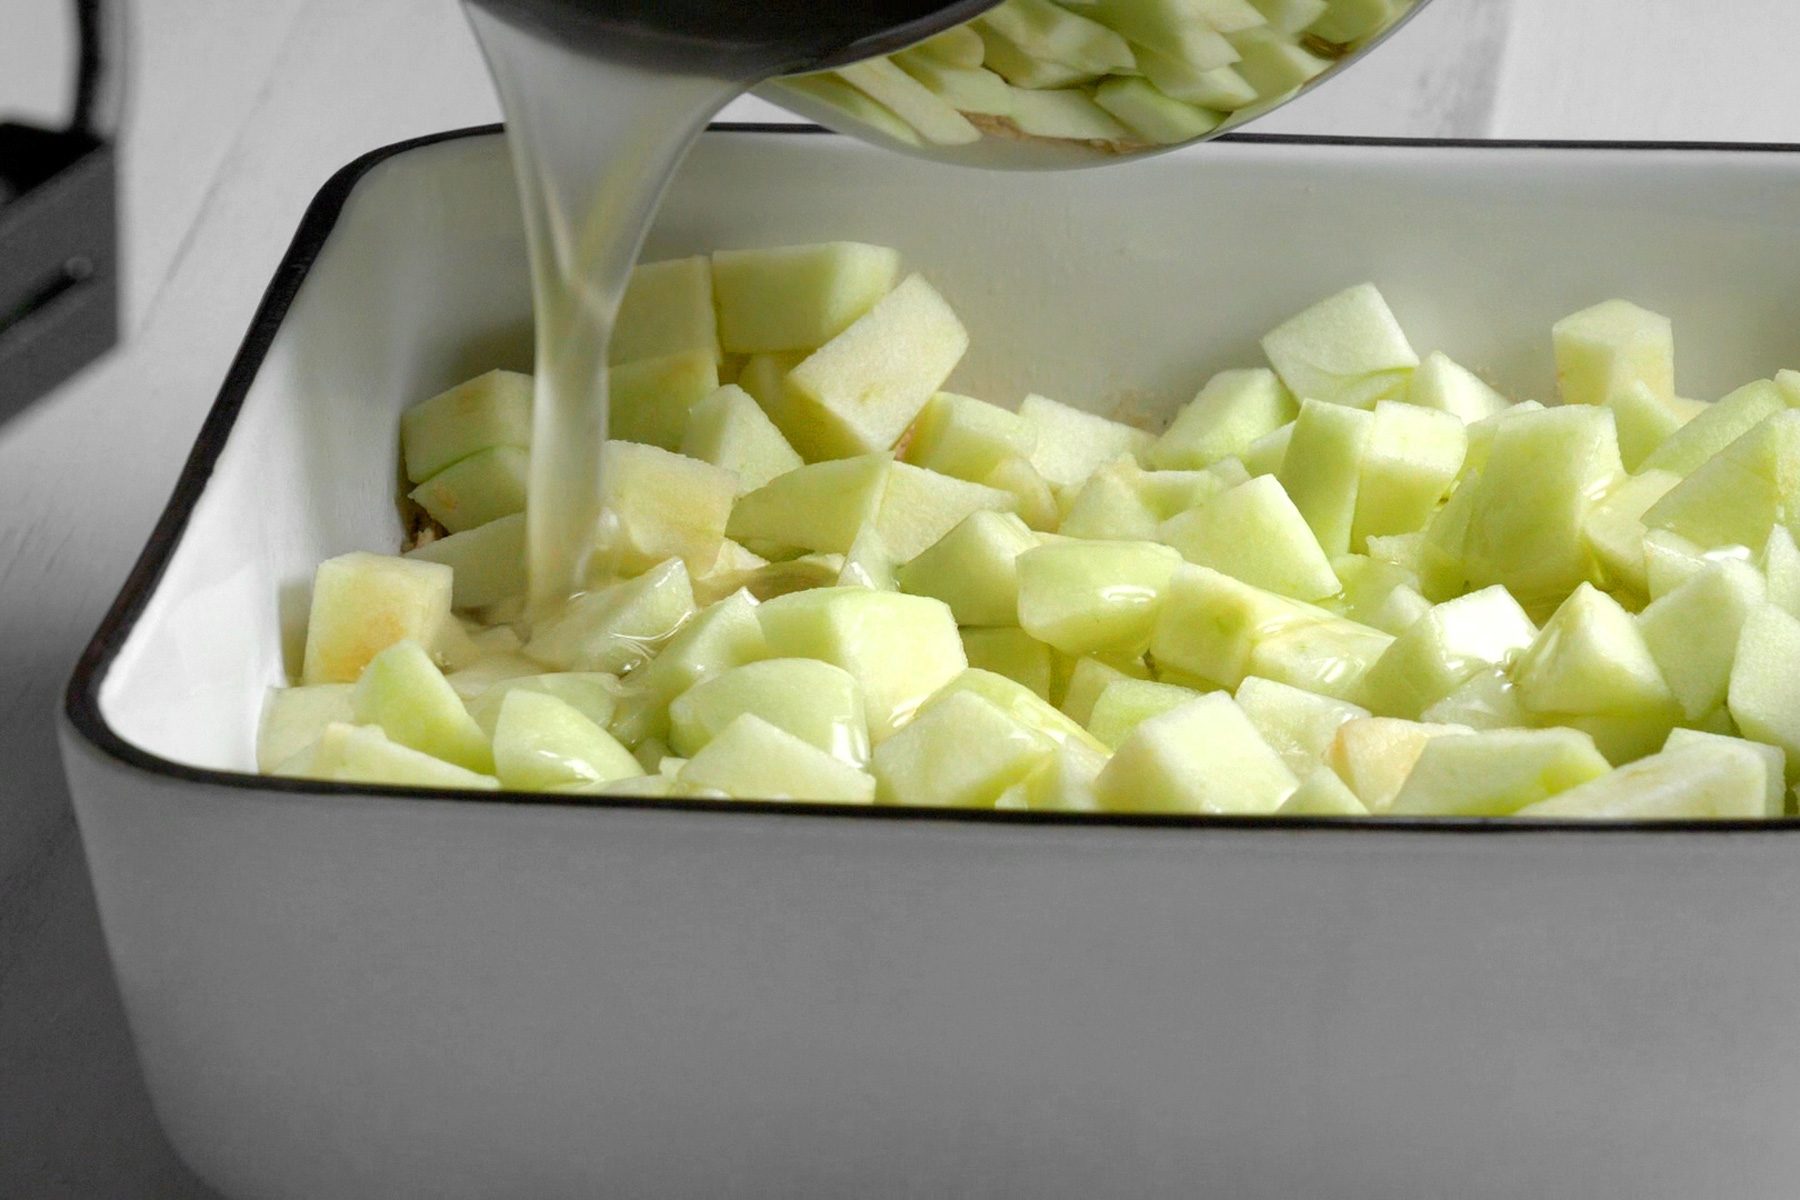 Syrup is pouring over the layer of chopped apples in a baking dish.